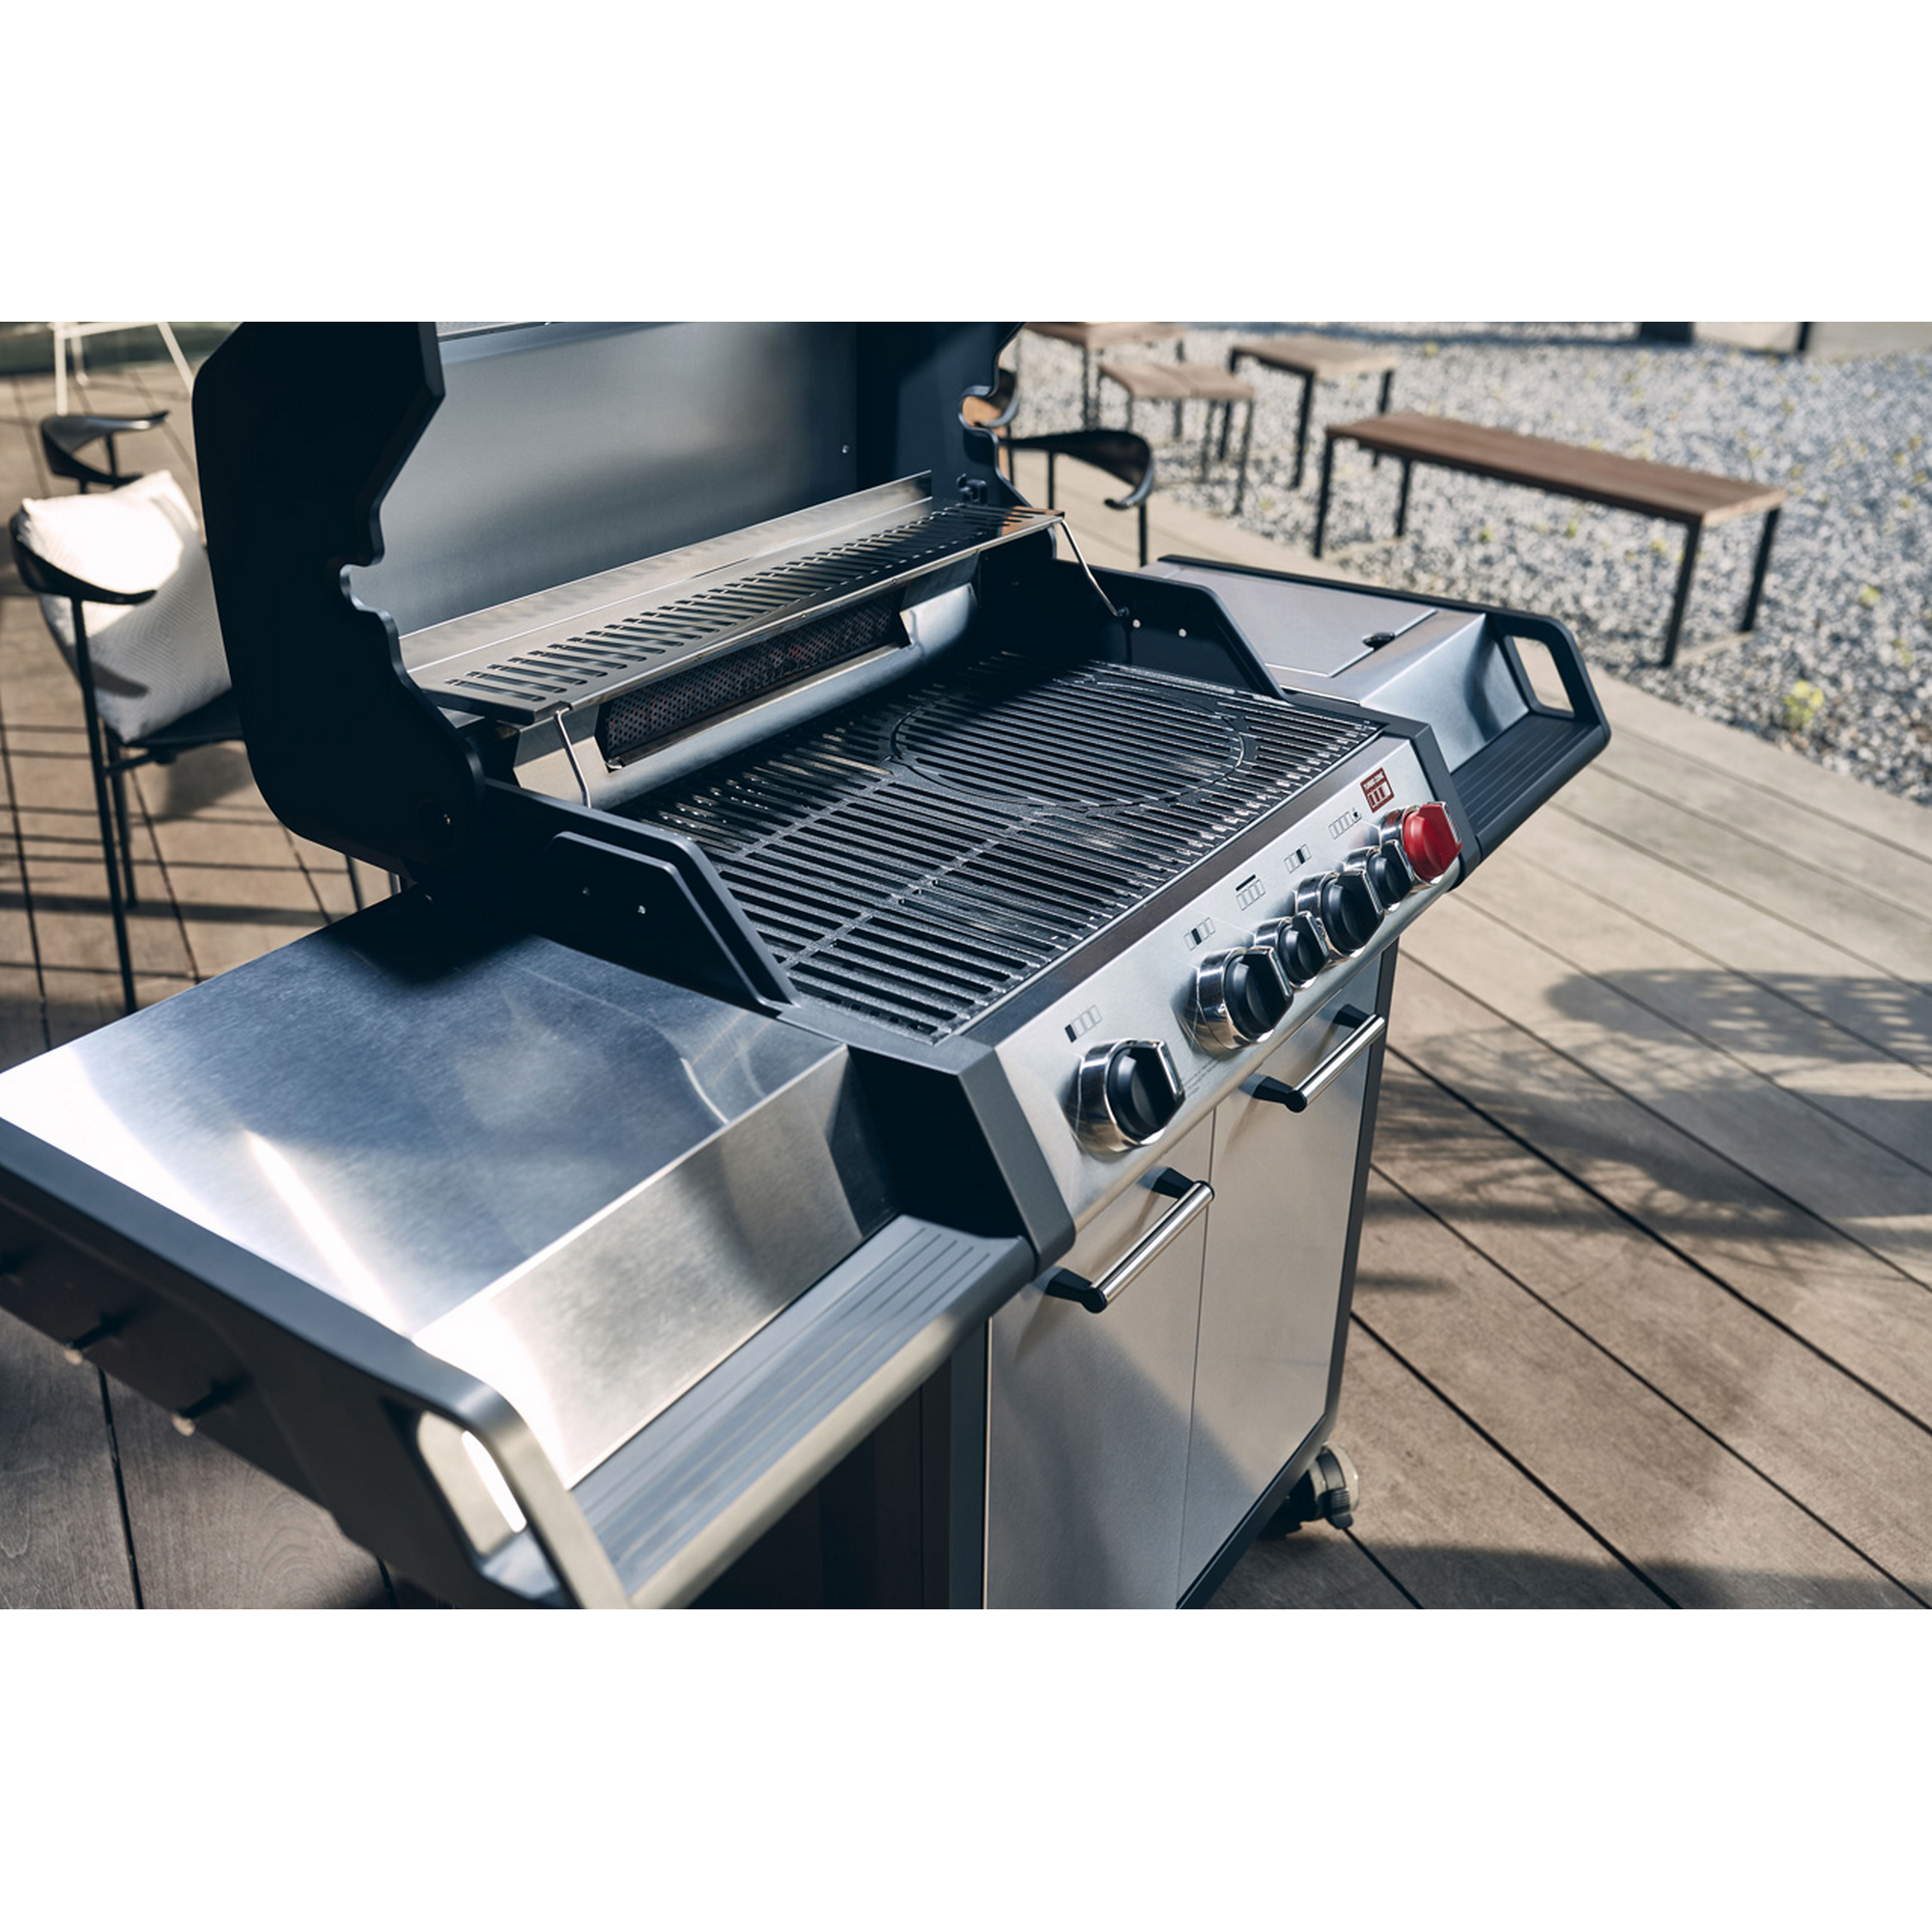 Gasgrill 'Monroe Pro 4 SIK Turbo' 4 Brenner 153,5 x 58 x 118,5 cm + product picture